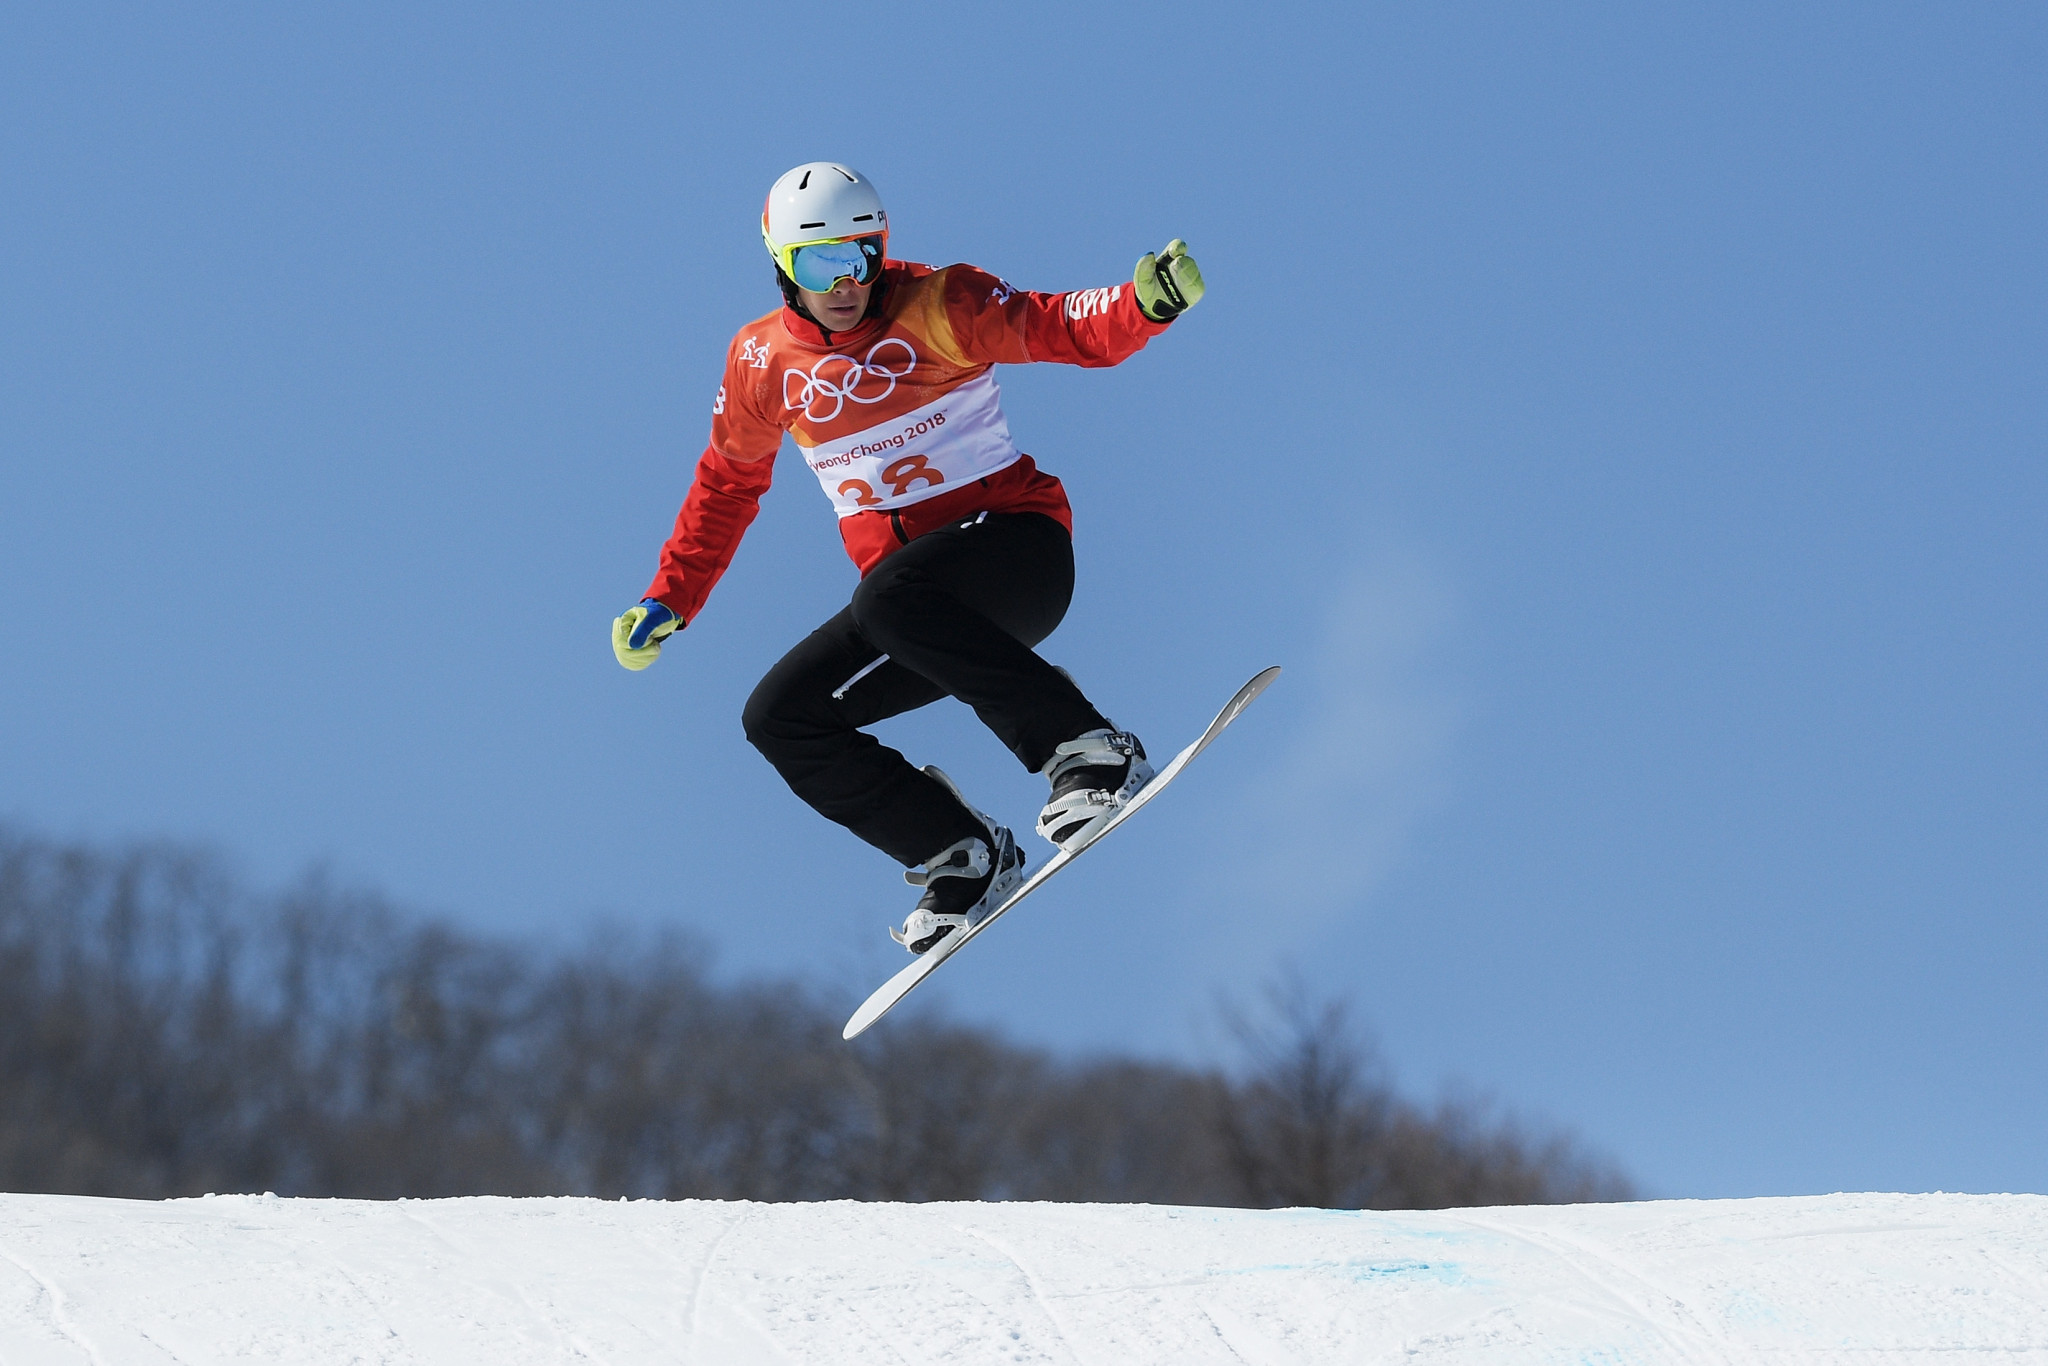 Eliot Grondin was the the youngest male member of the Canadian Winter Olympic team at Pyeongchang 2018 ©Getty Images